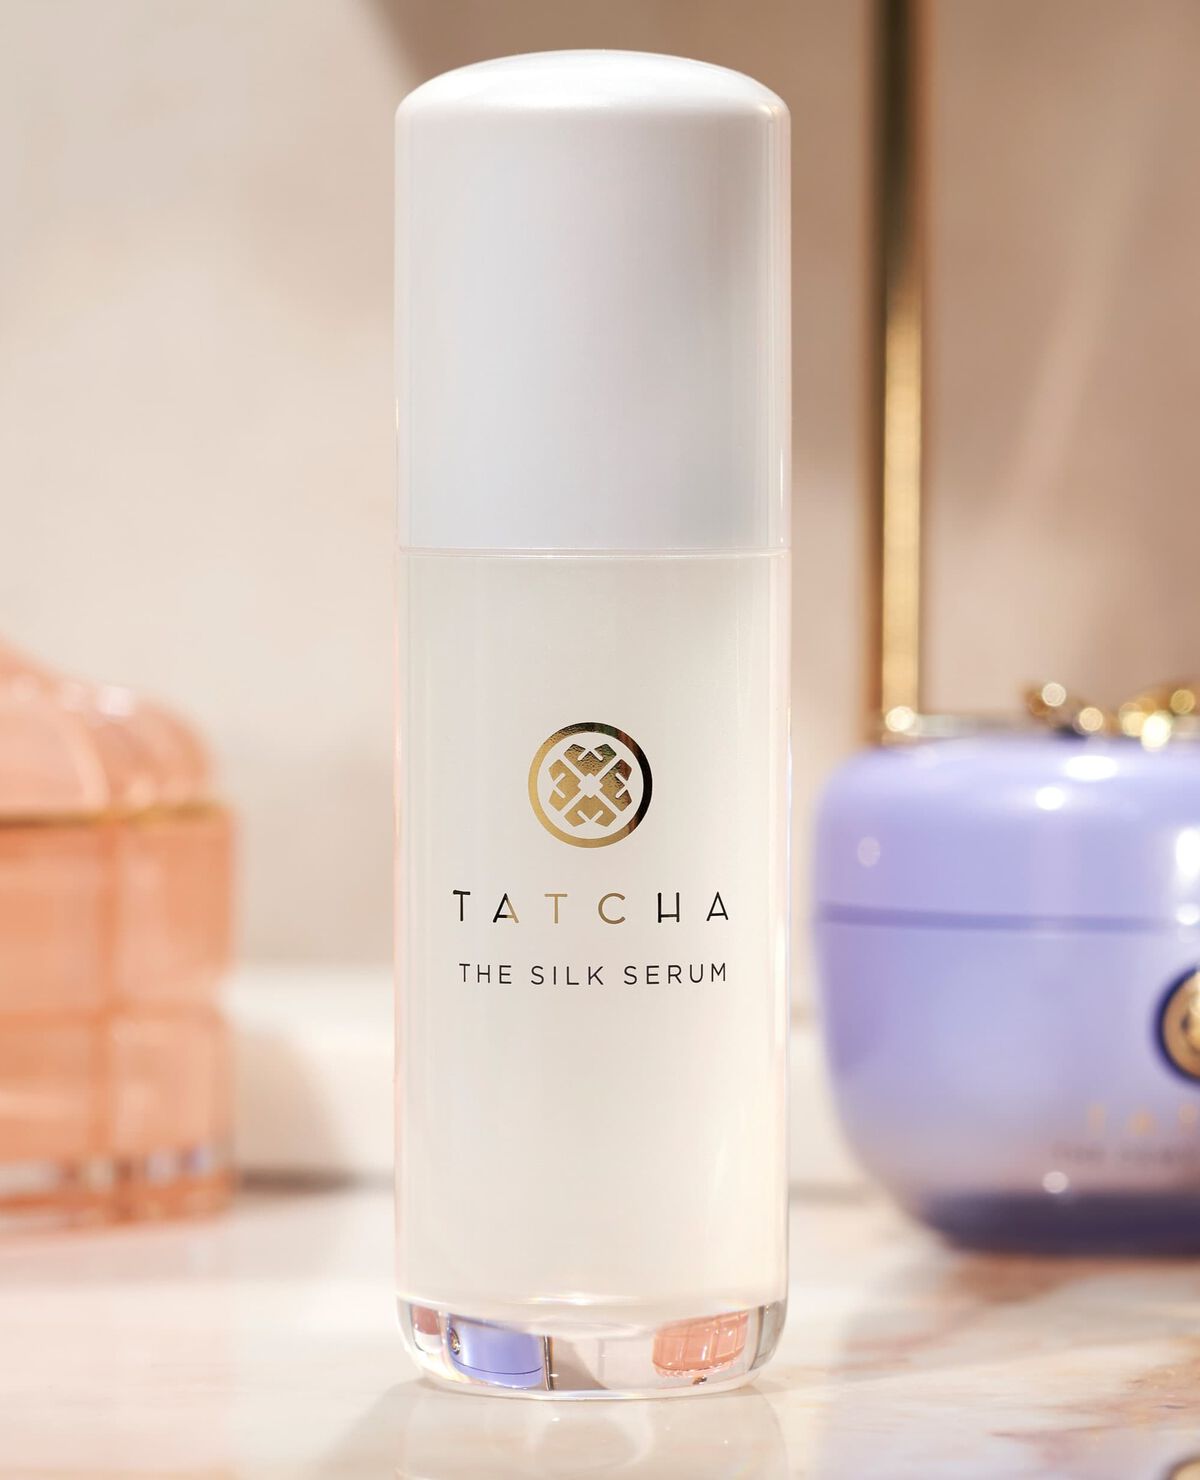 MOST WANTED | Our Beauty Editor Shares Her Verdict On Tatcha's Silk Serum